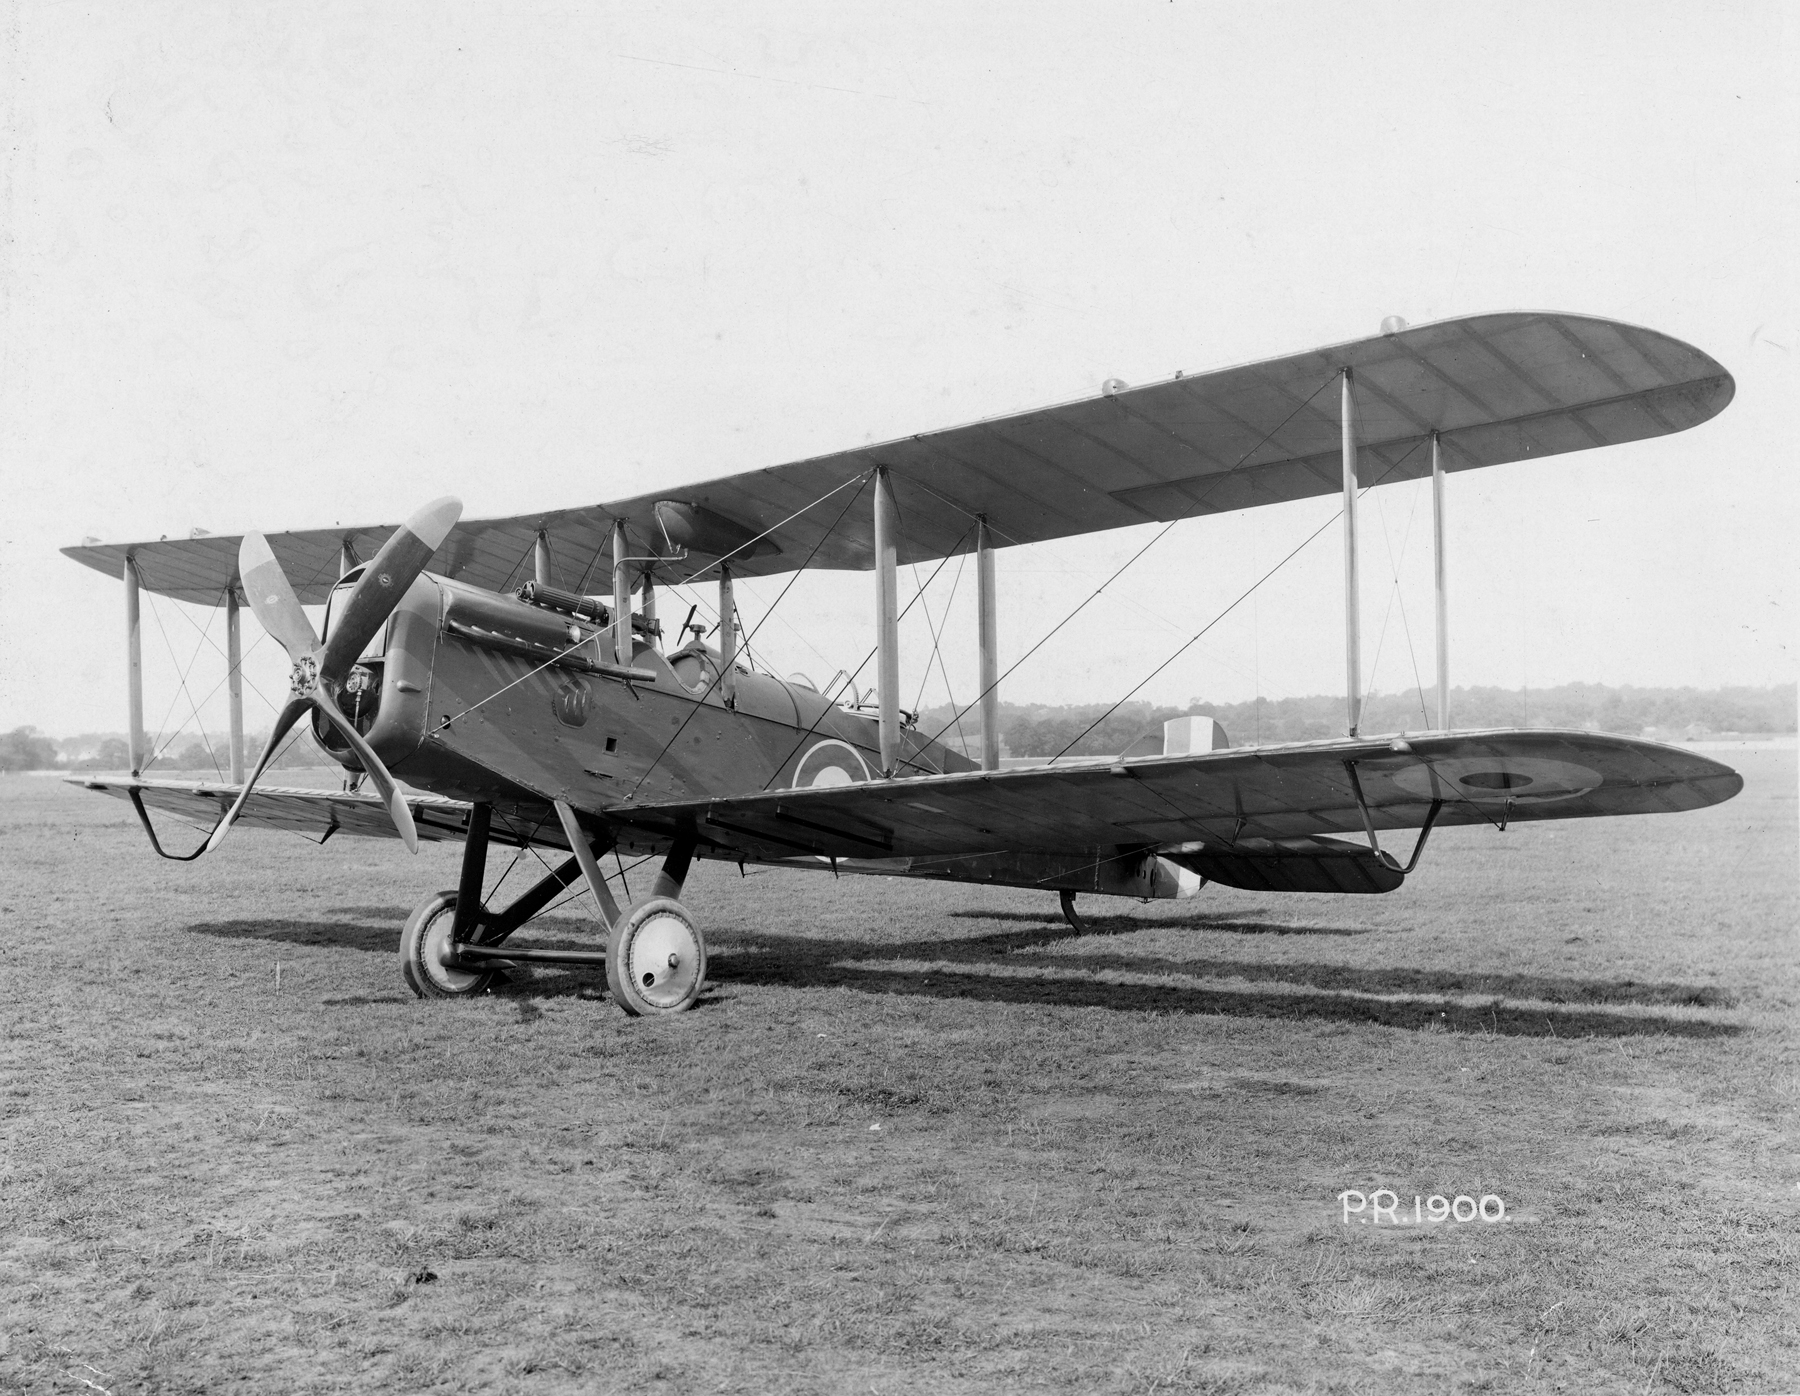 De Havilland DH-4 Air Force biplane.  The first De Havilland DH-4 flew in France on May 17, 1918. By the Armistice, 1,213 had been received in Europe. Air Force photo